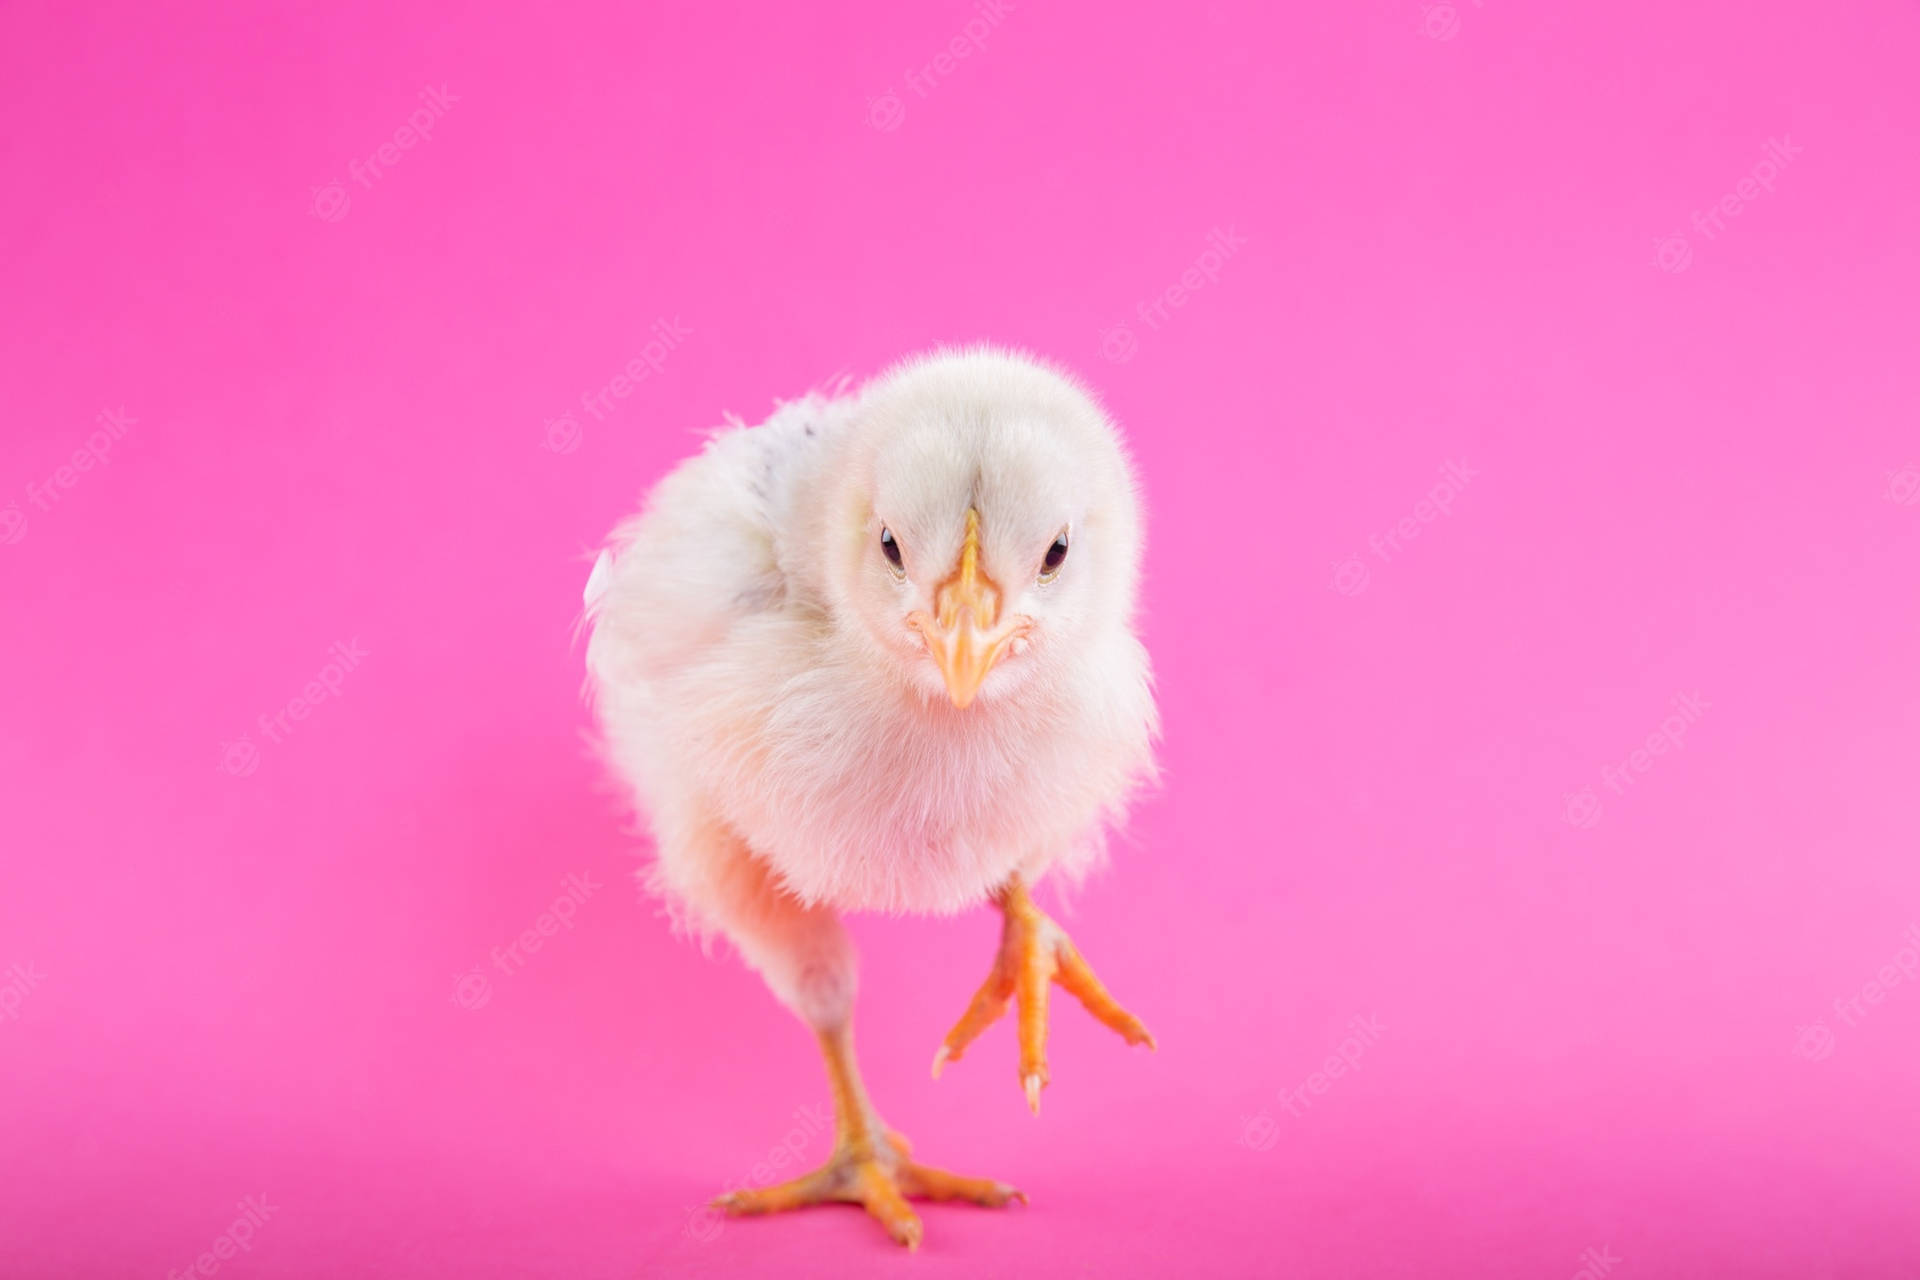 Chick On Pink Wallpaper